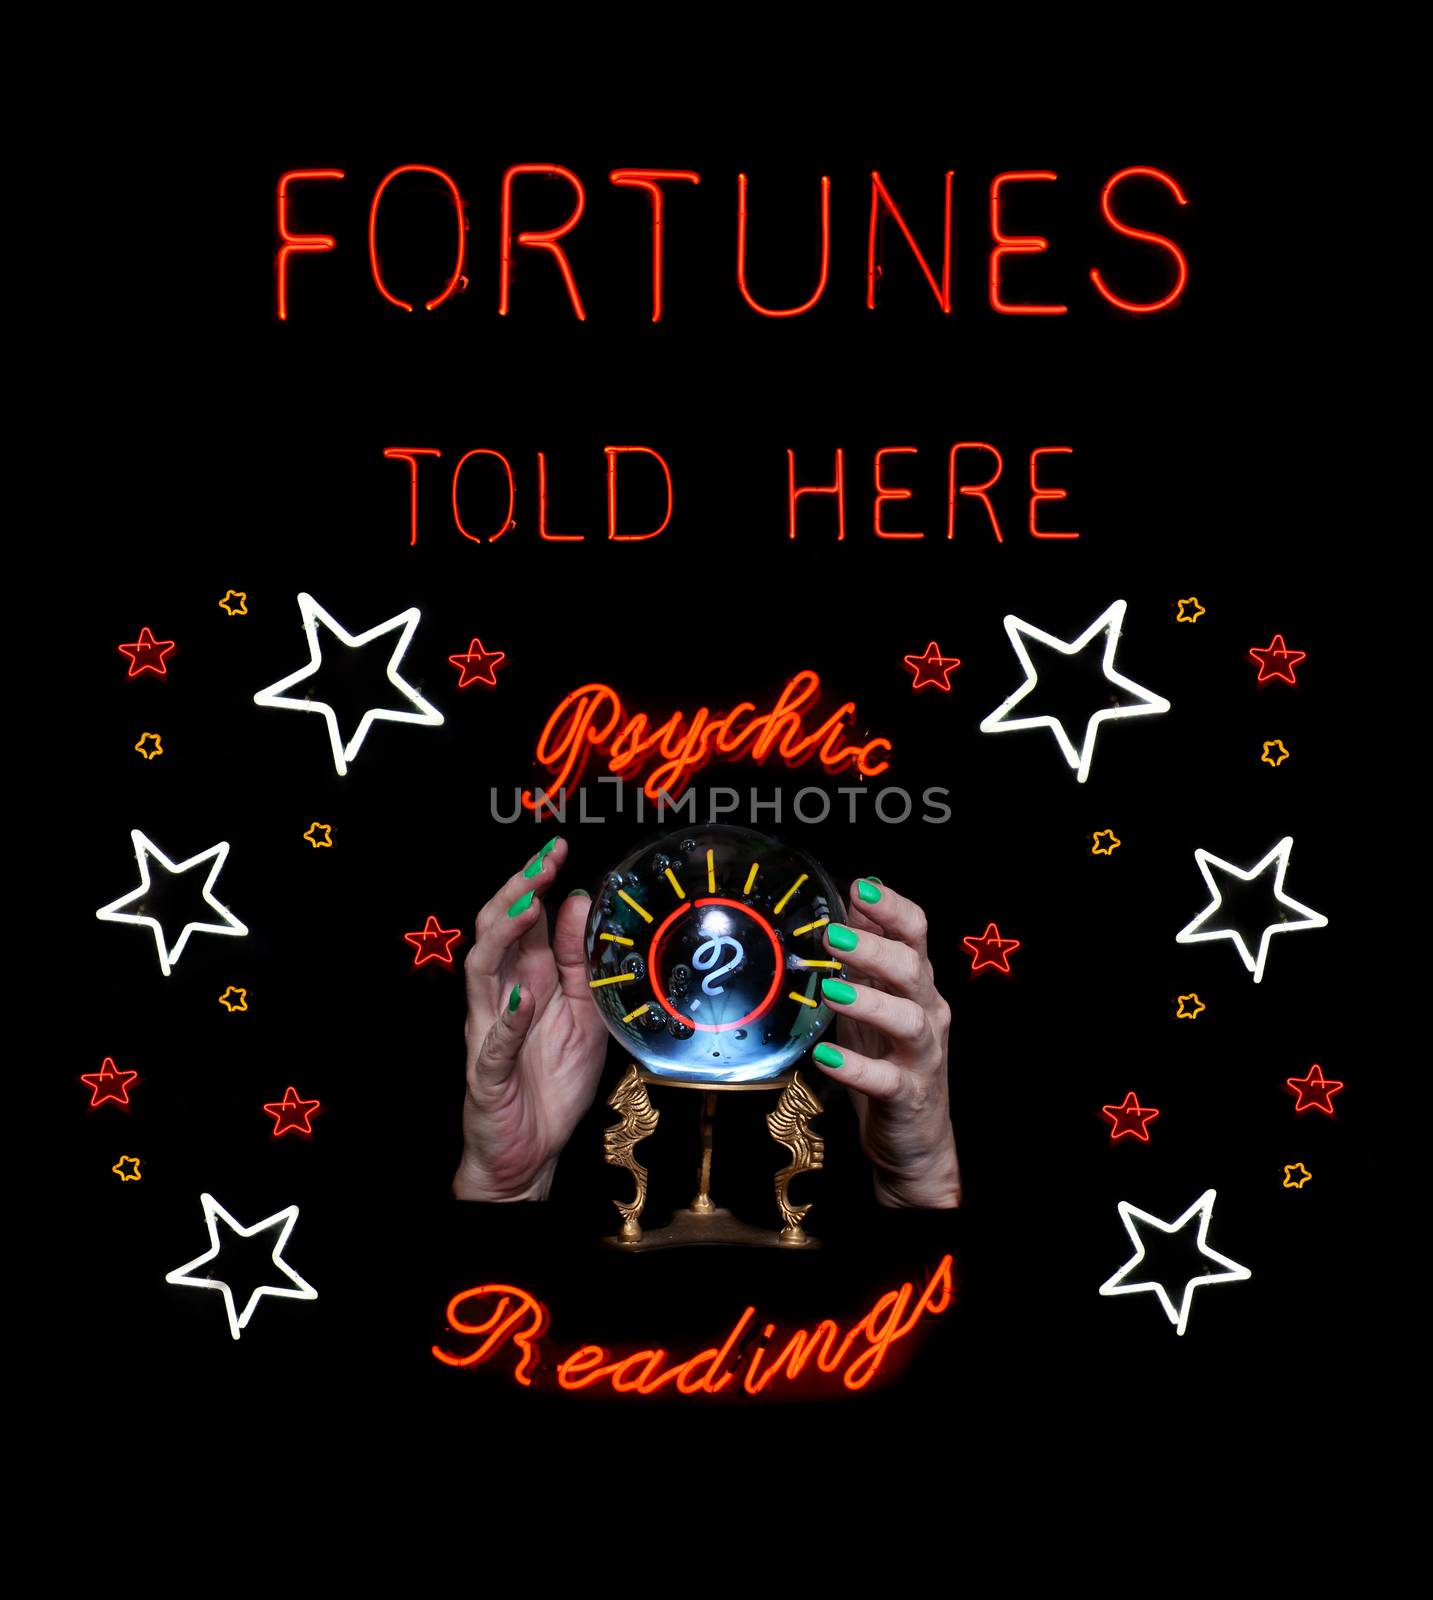 Neon Fortune Teller Sign With Crystal Ball by Marti157900